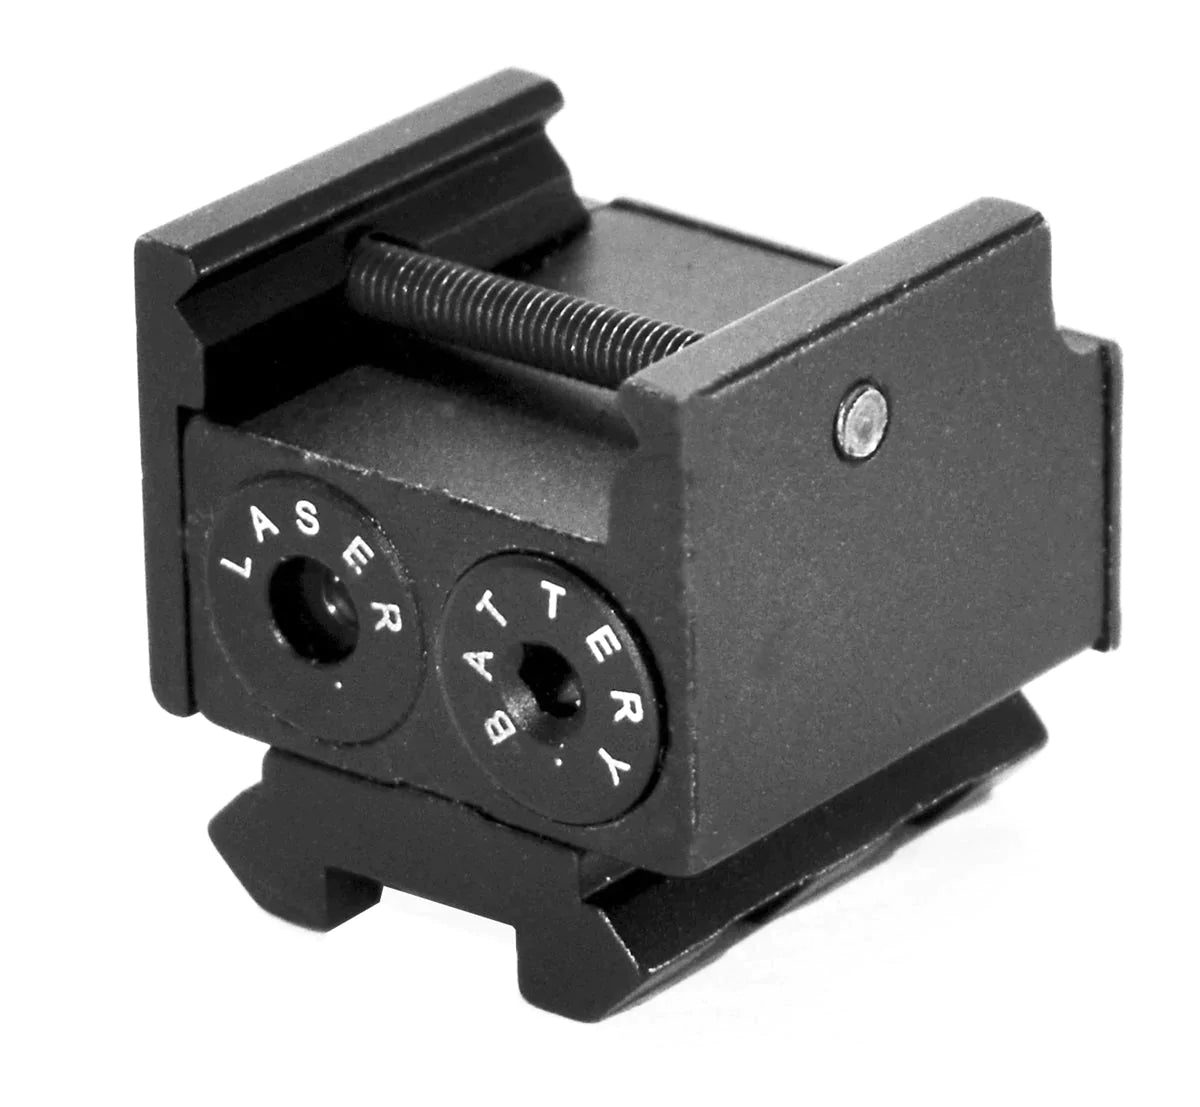 Trinity Compact red dot Sight for Walther ppq Tactical Optics Home Defense Accessory Picatinny Weaver Mount Adapter Aluminum Black. - TRINITY SUPPLY INC